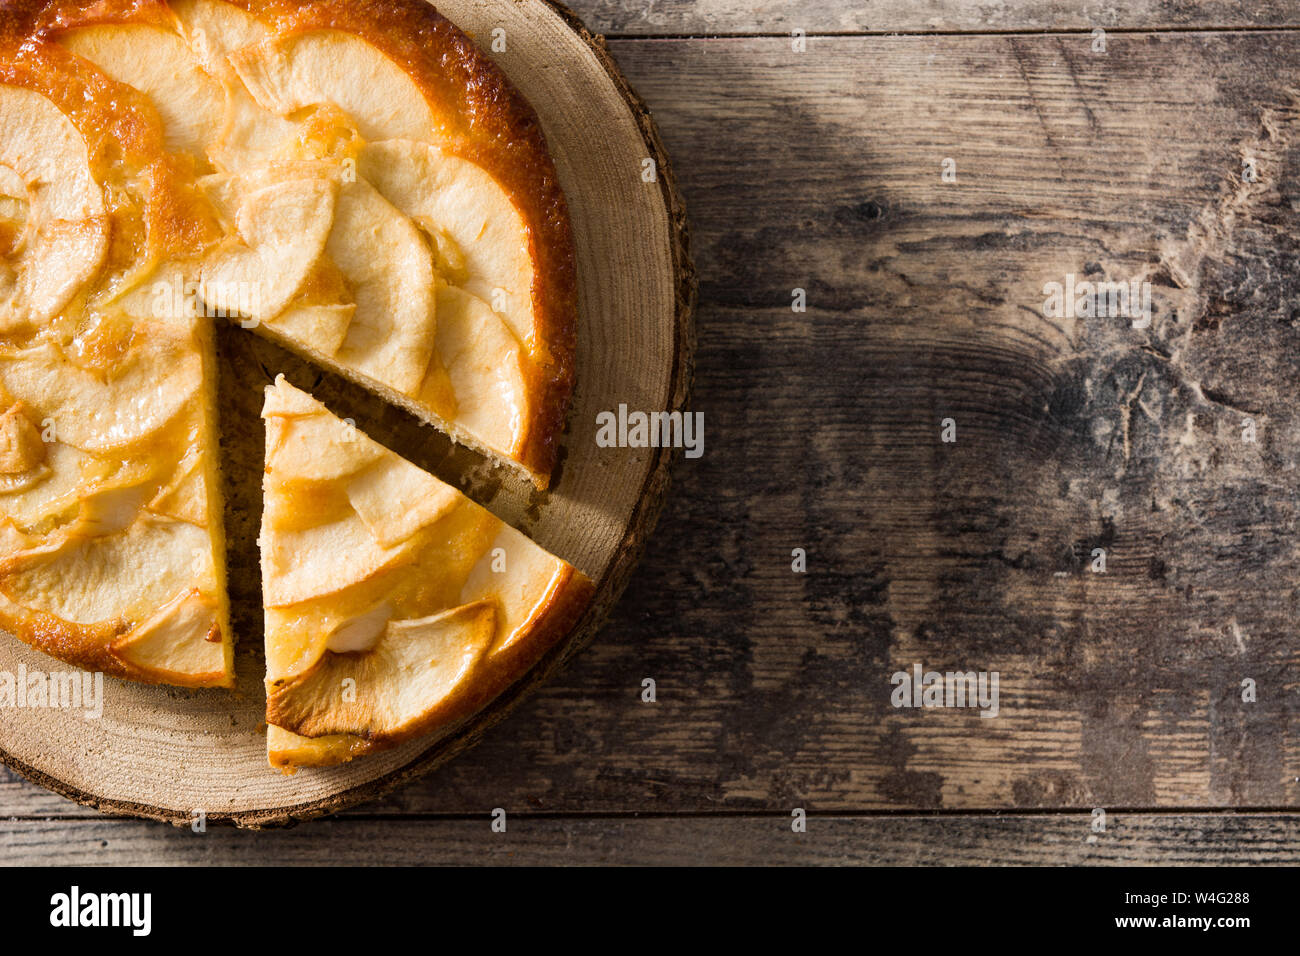 Homemade apple pie on wooden table. Top view. Copy space Stock Photo